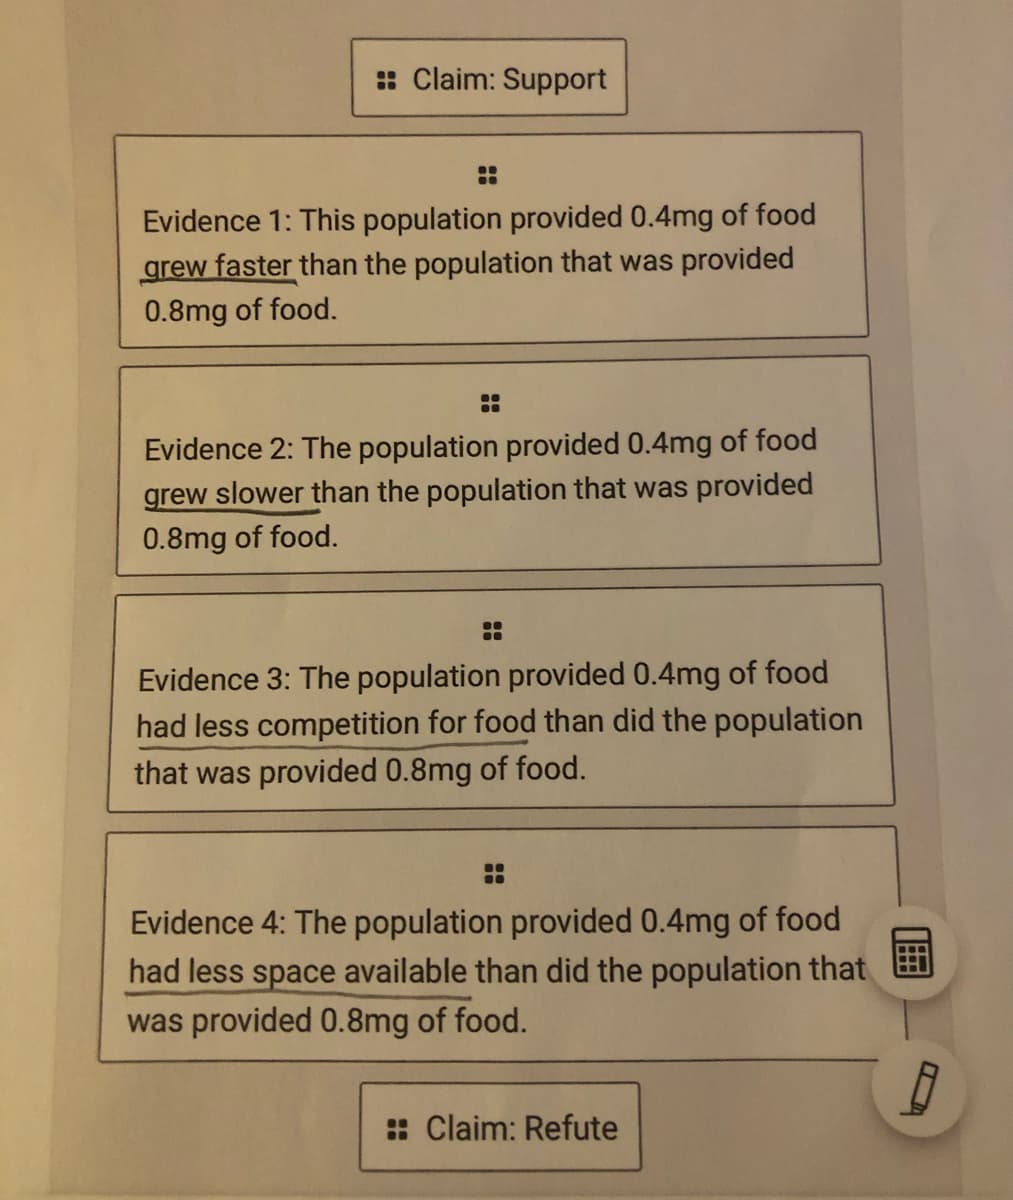 : Claim: Support
Evidence 1: This population provided 0.4mg of food
grew faster than the population that was provided
0.8mg of food.
Evidence 2: The population provided 0.4mg of food
grew slower than the population that was provided
0.8mg of food.
Evidence 3: The population provided 0.4mg of food
had less competition for food than did the population
that was provided 0.8mg of food.
Evidence 4: The population provided 0.4mg of food
had less space available than did the population that
was provided 0.8mg of food.
: Claim: Refute
